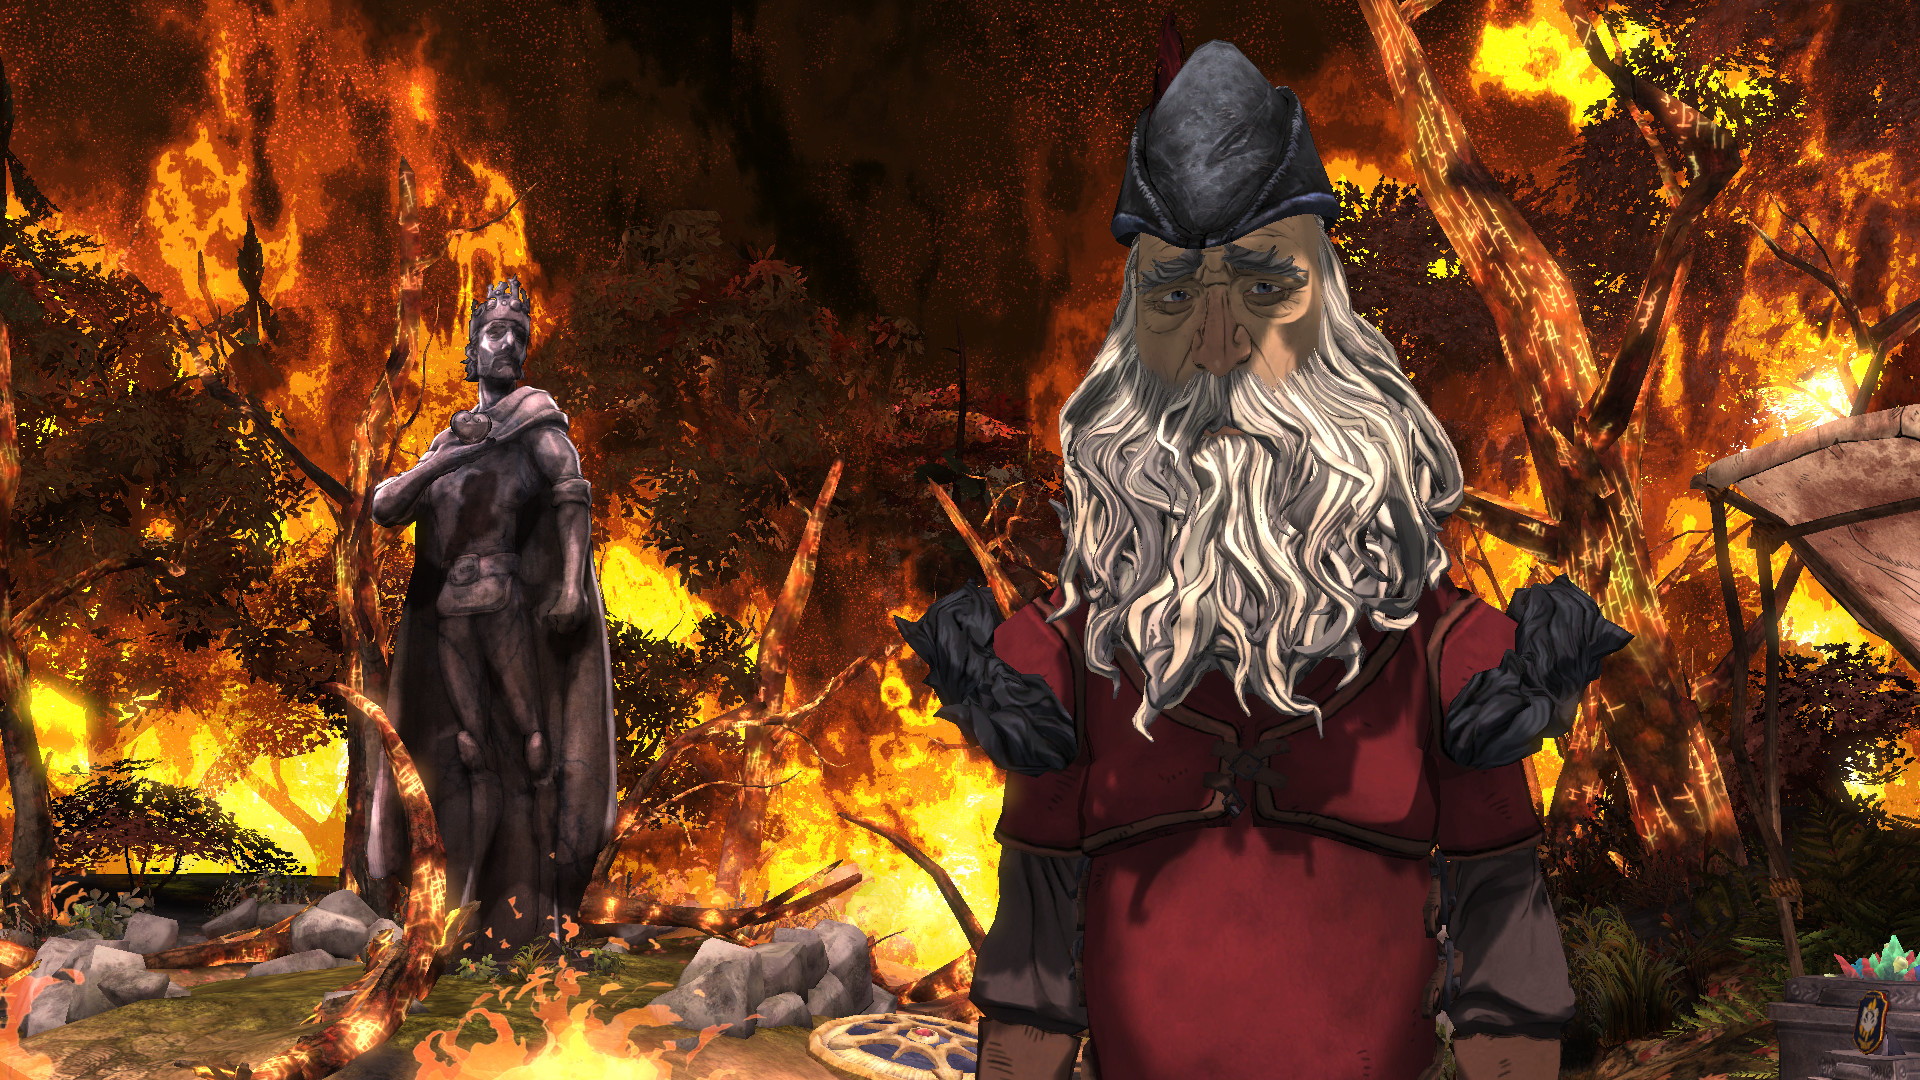 King's Quest - Chapter 5: The Good Knight - screenshot 2